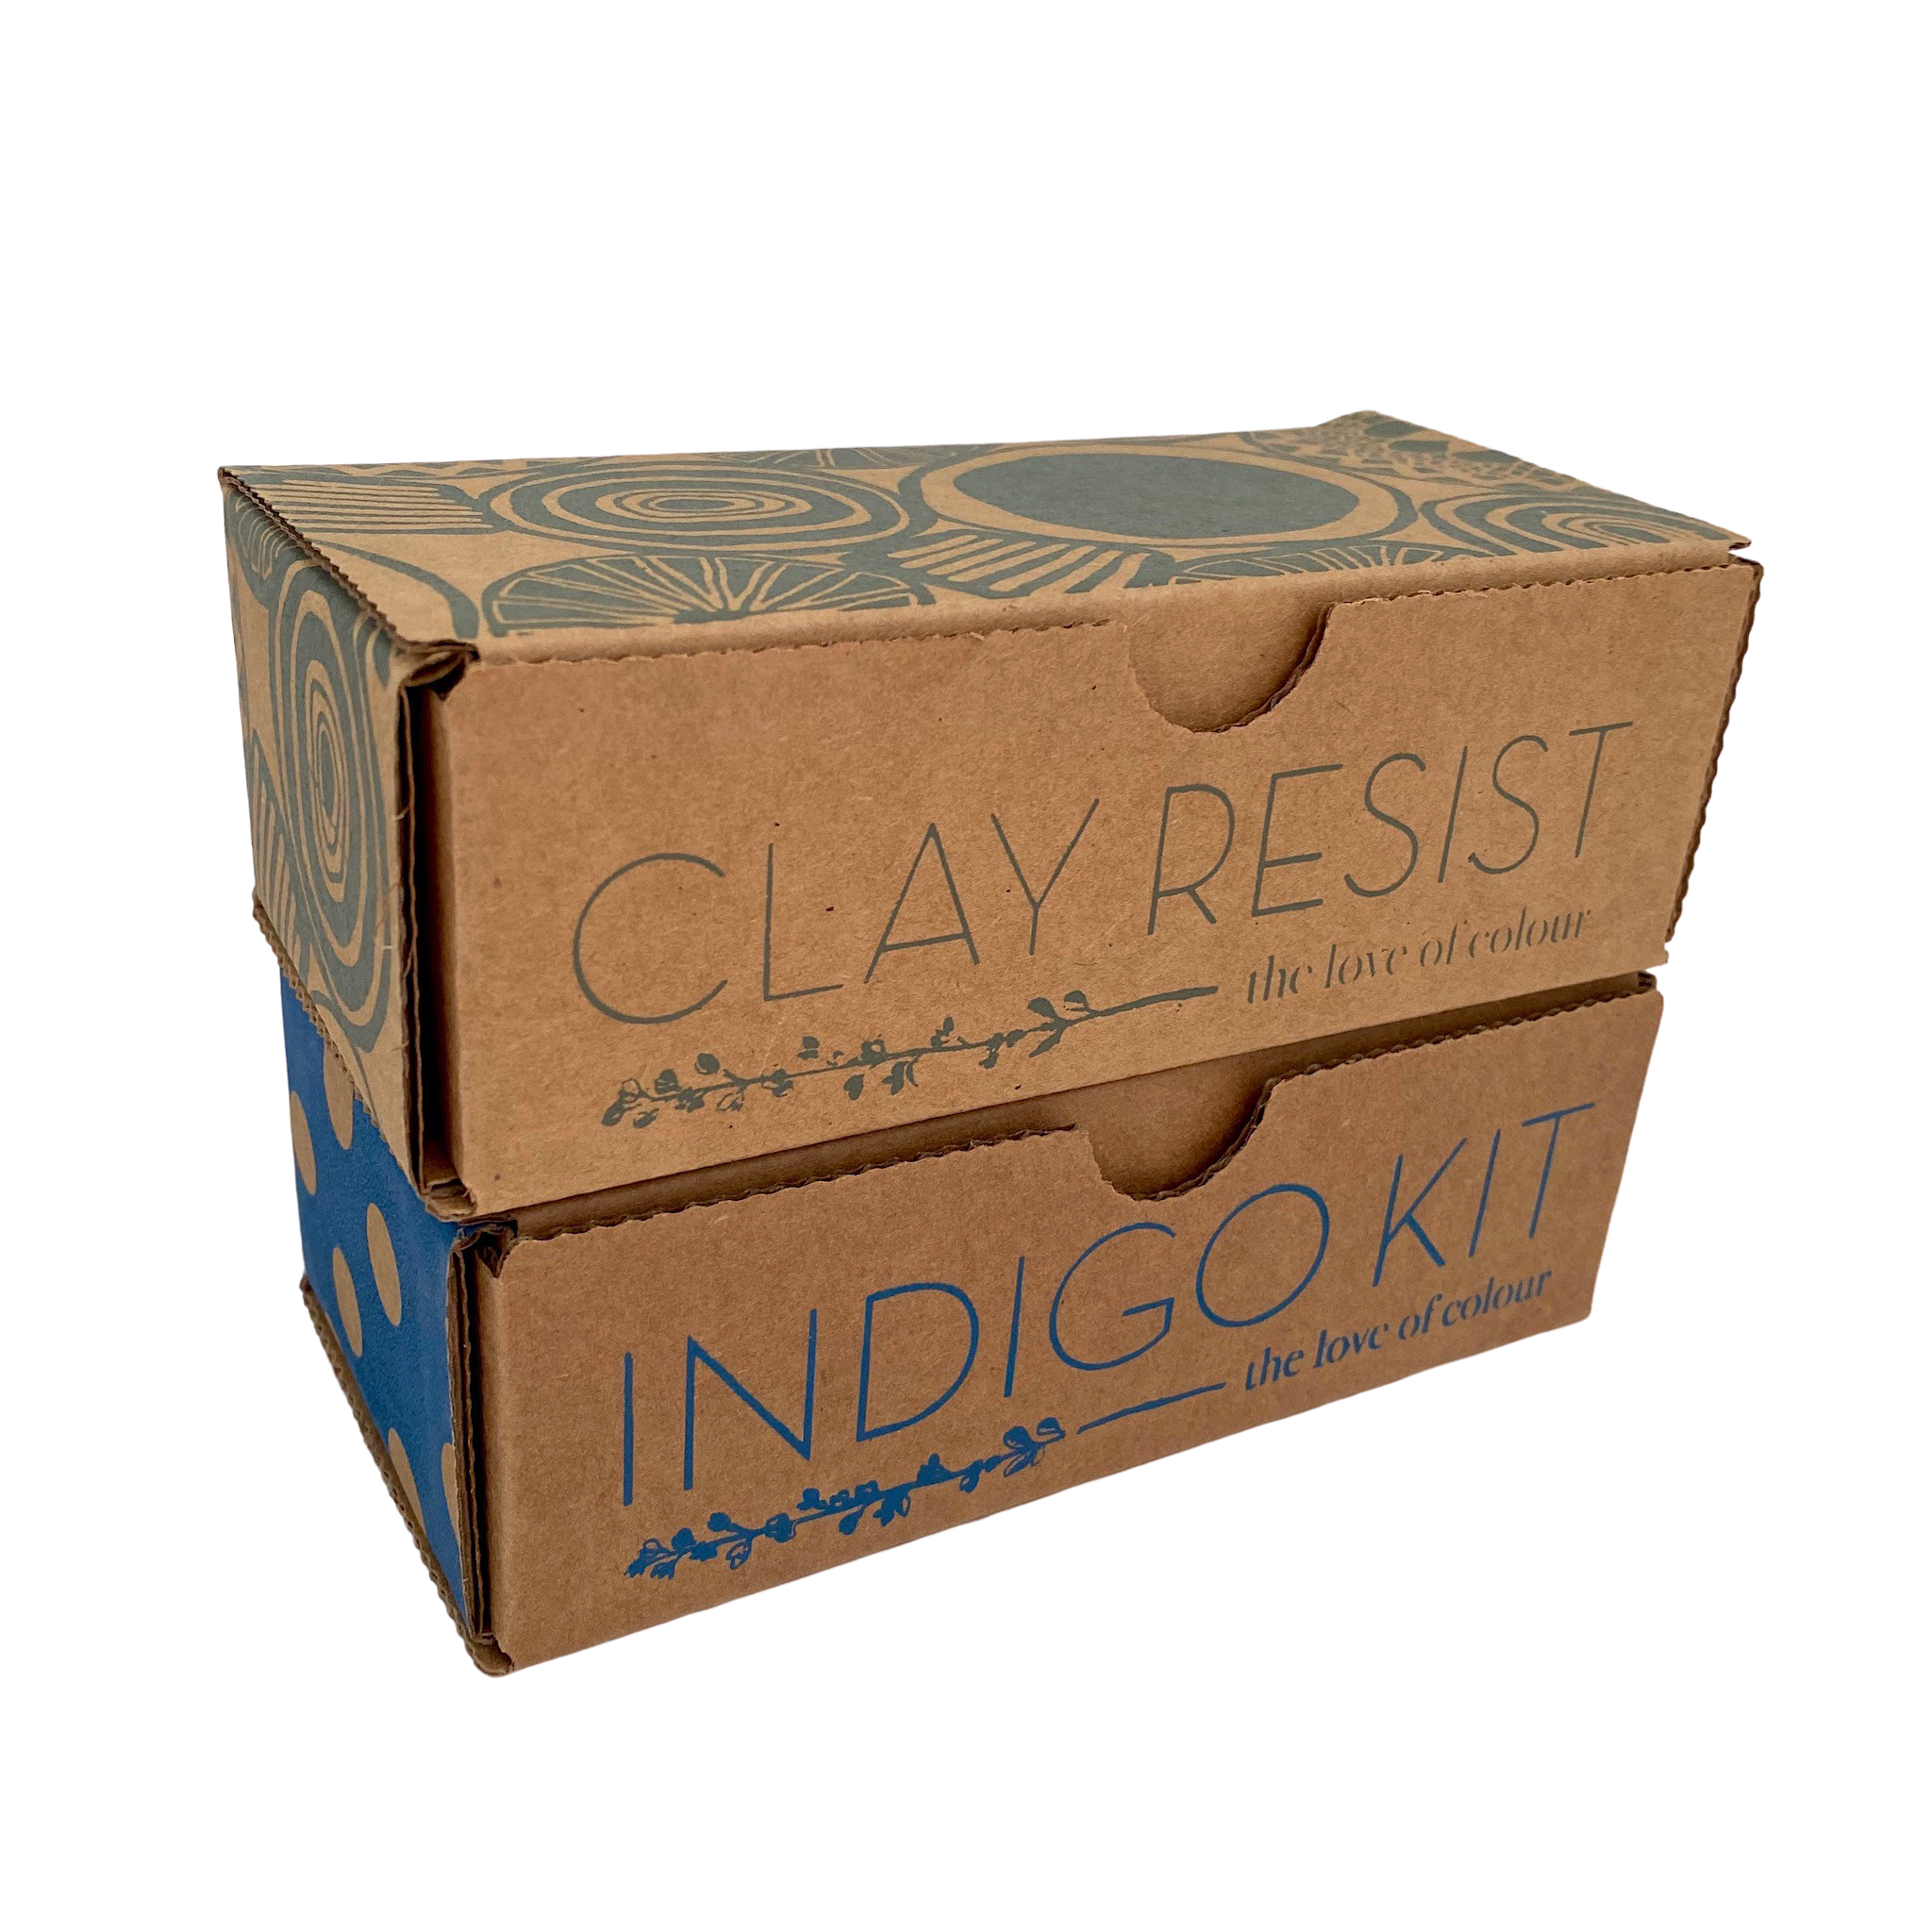 Clay resist and indigo dye kits stacked together